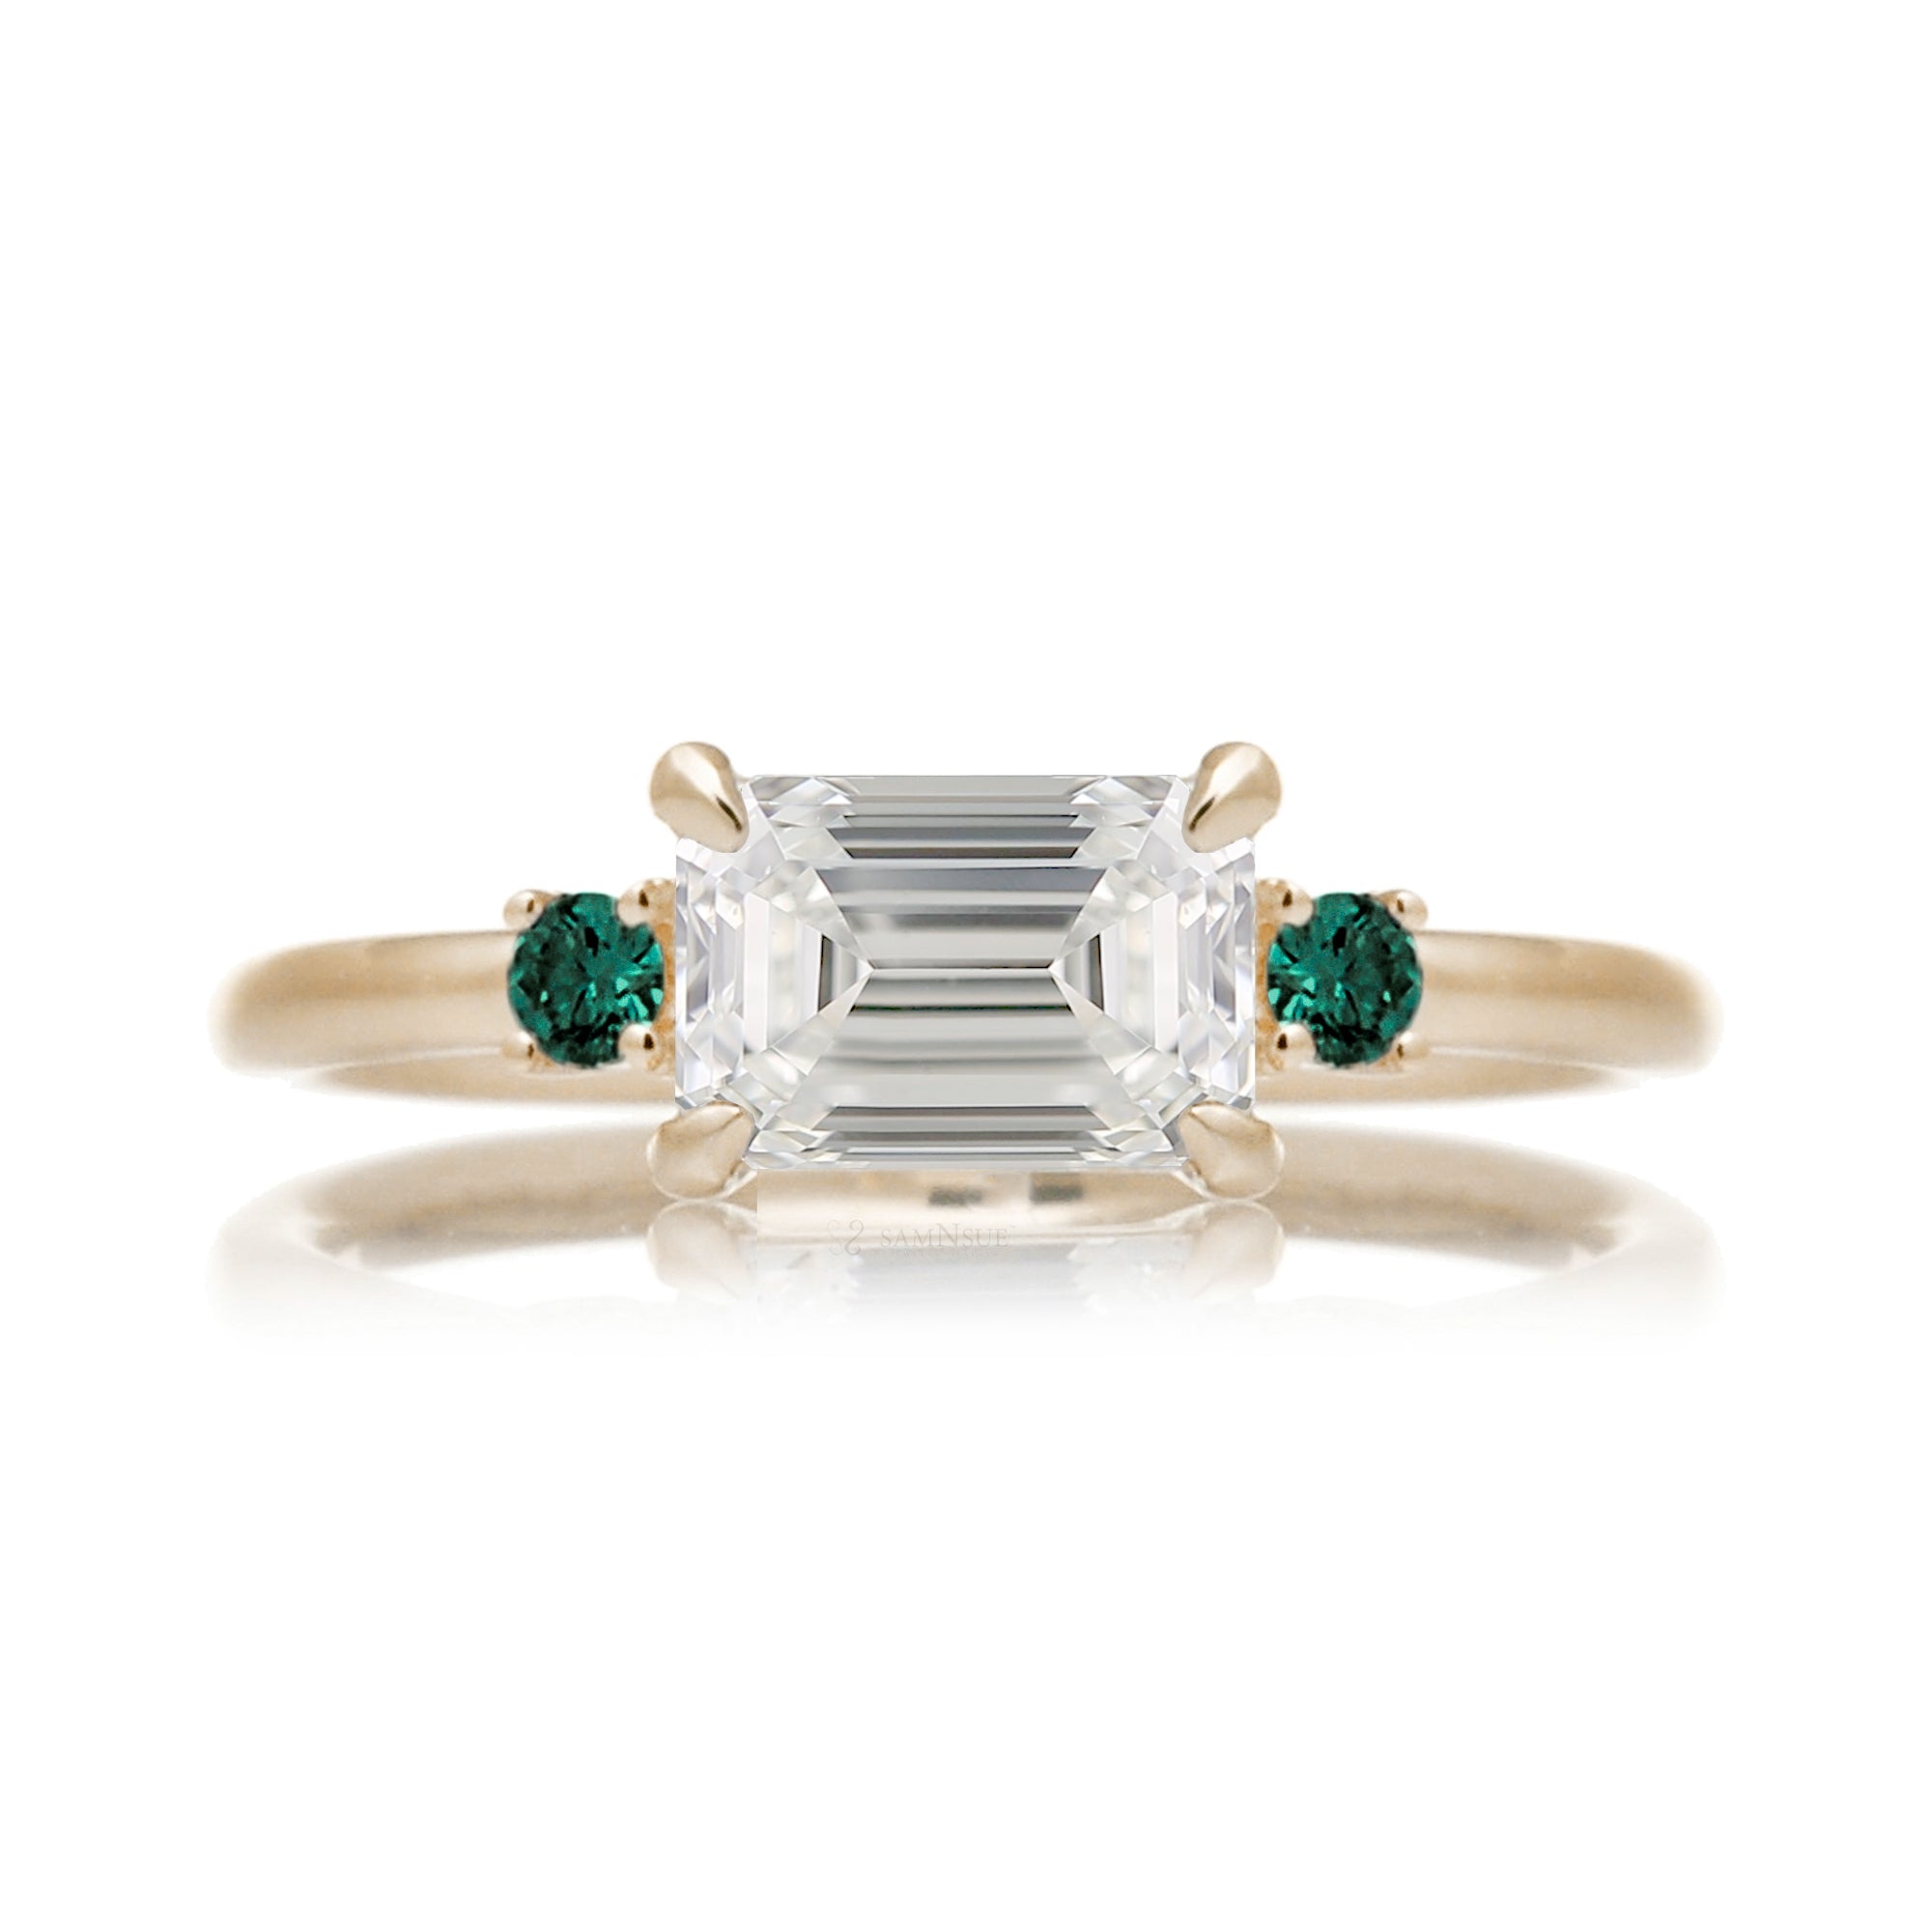 east-west emerald cut diamond three stone ring the Lena with side green emeralds yellow gold